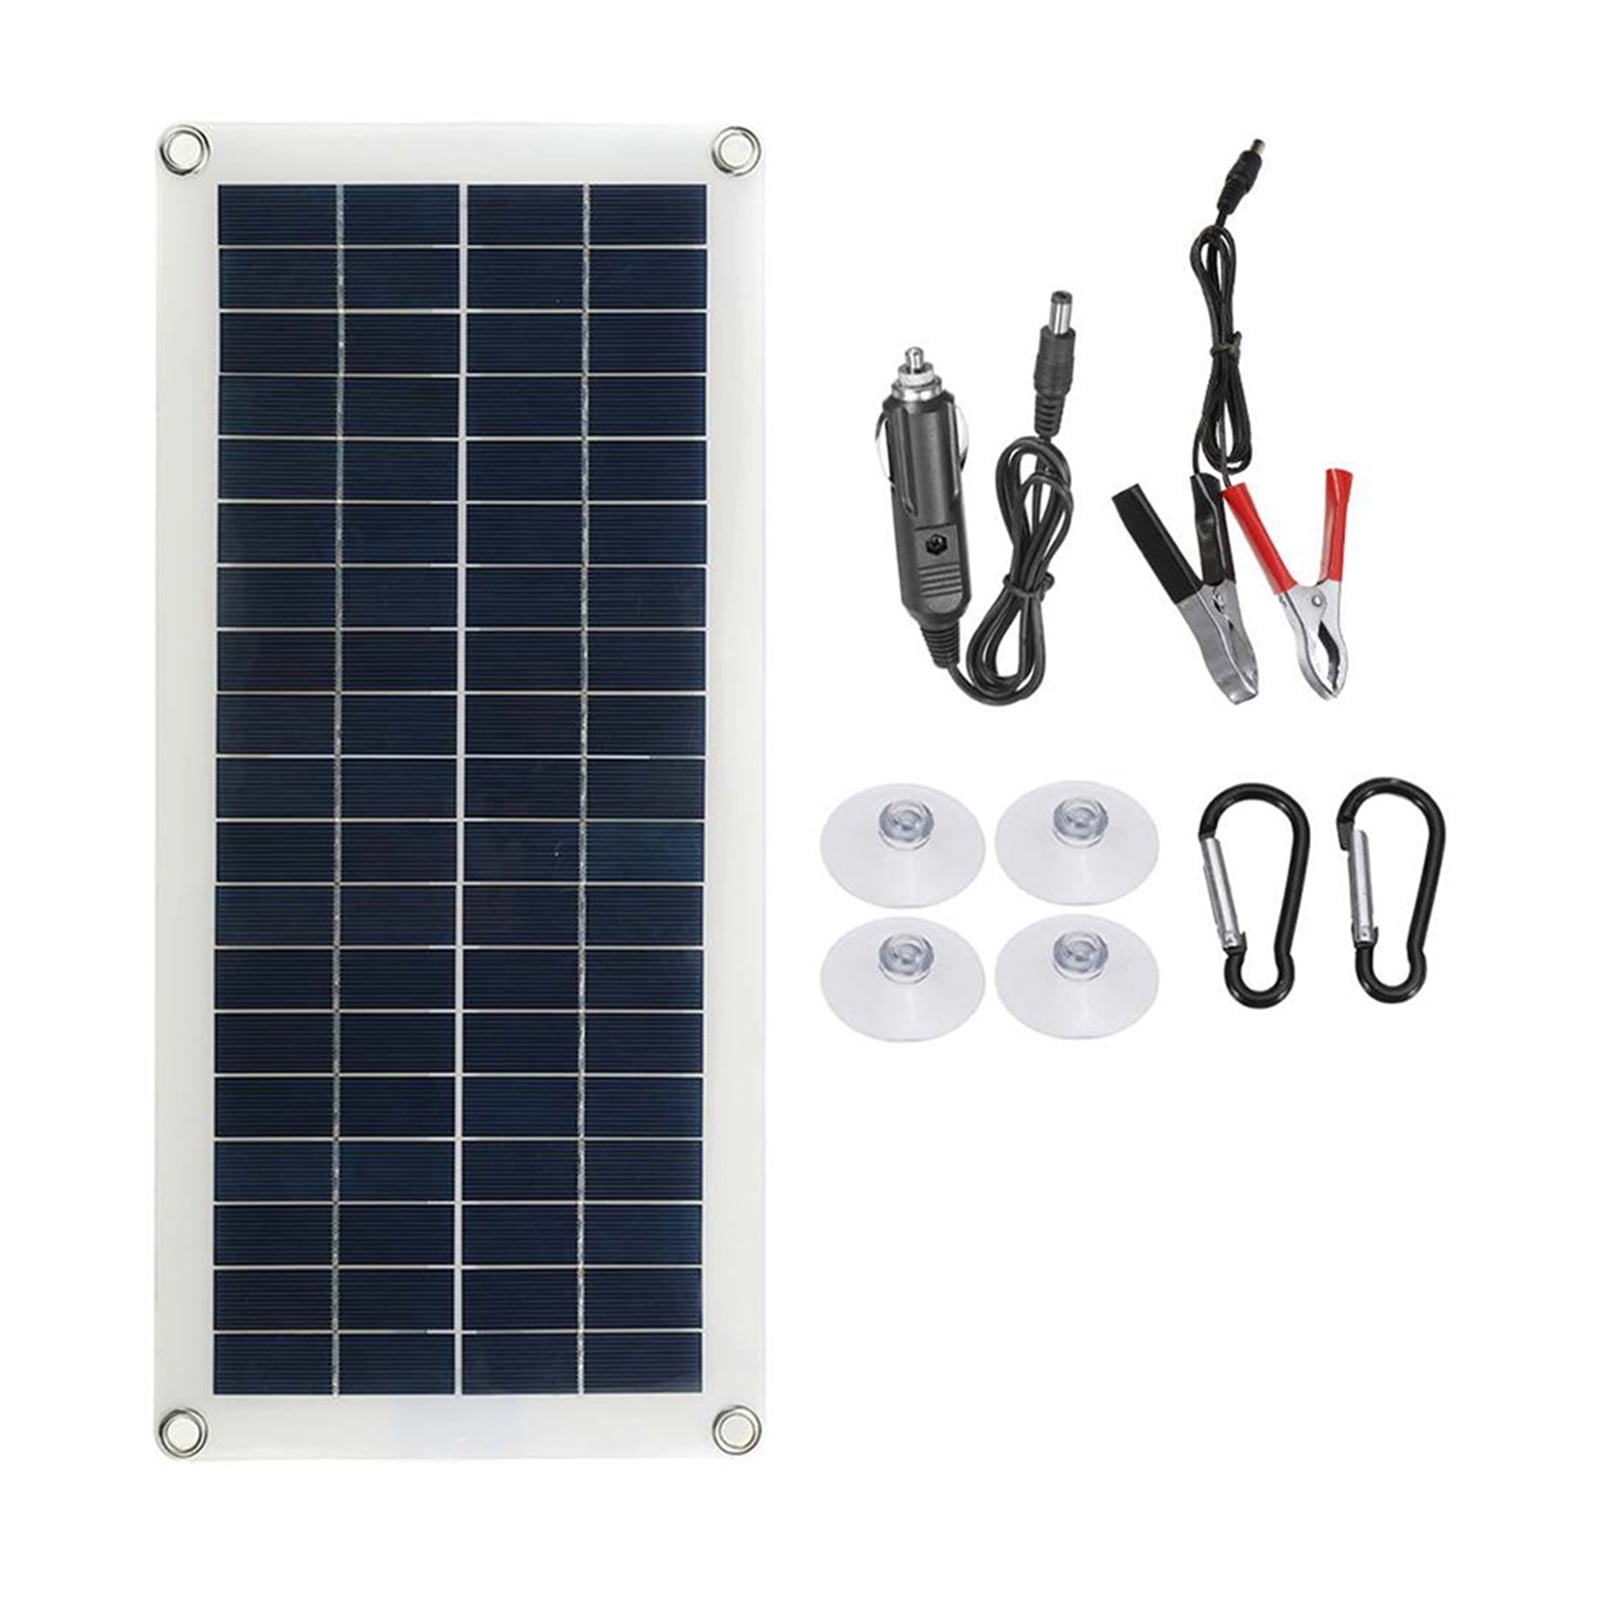 Details about   Renogy 100W Watts 12V Mono Solar Panel High Efficiency Module RV Boat Camping 